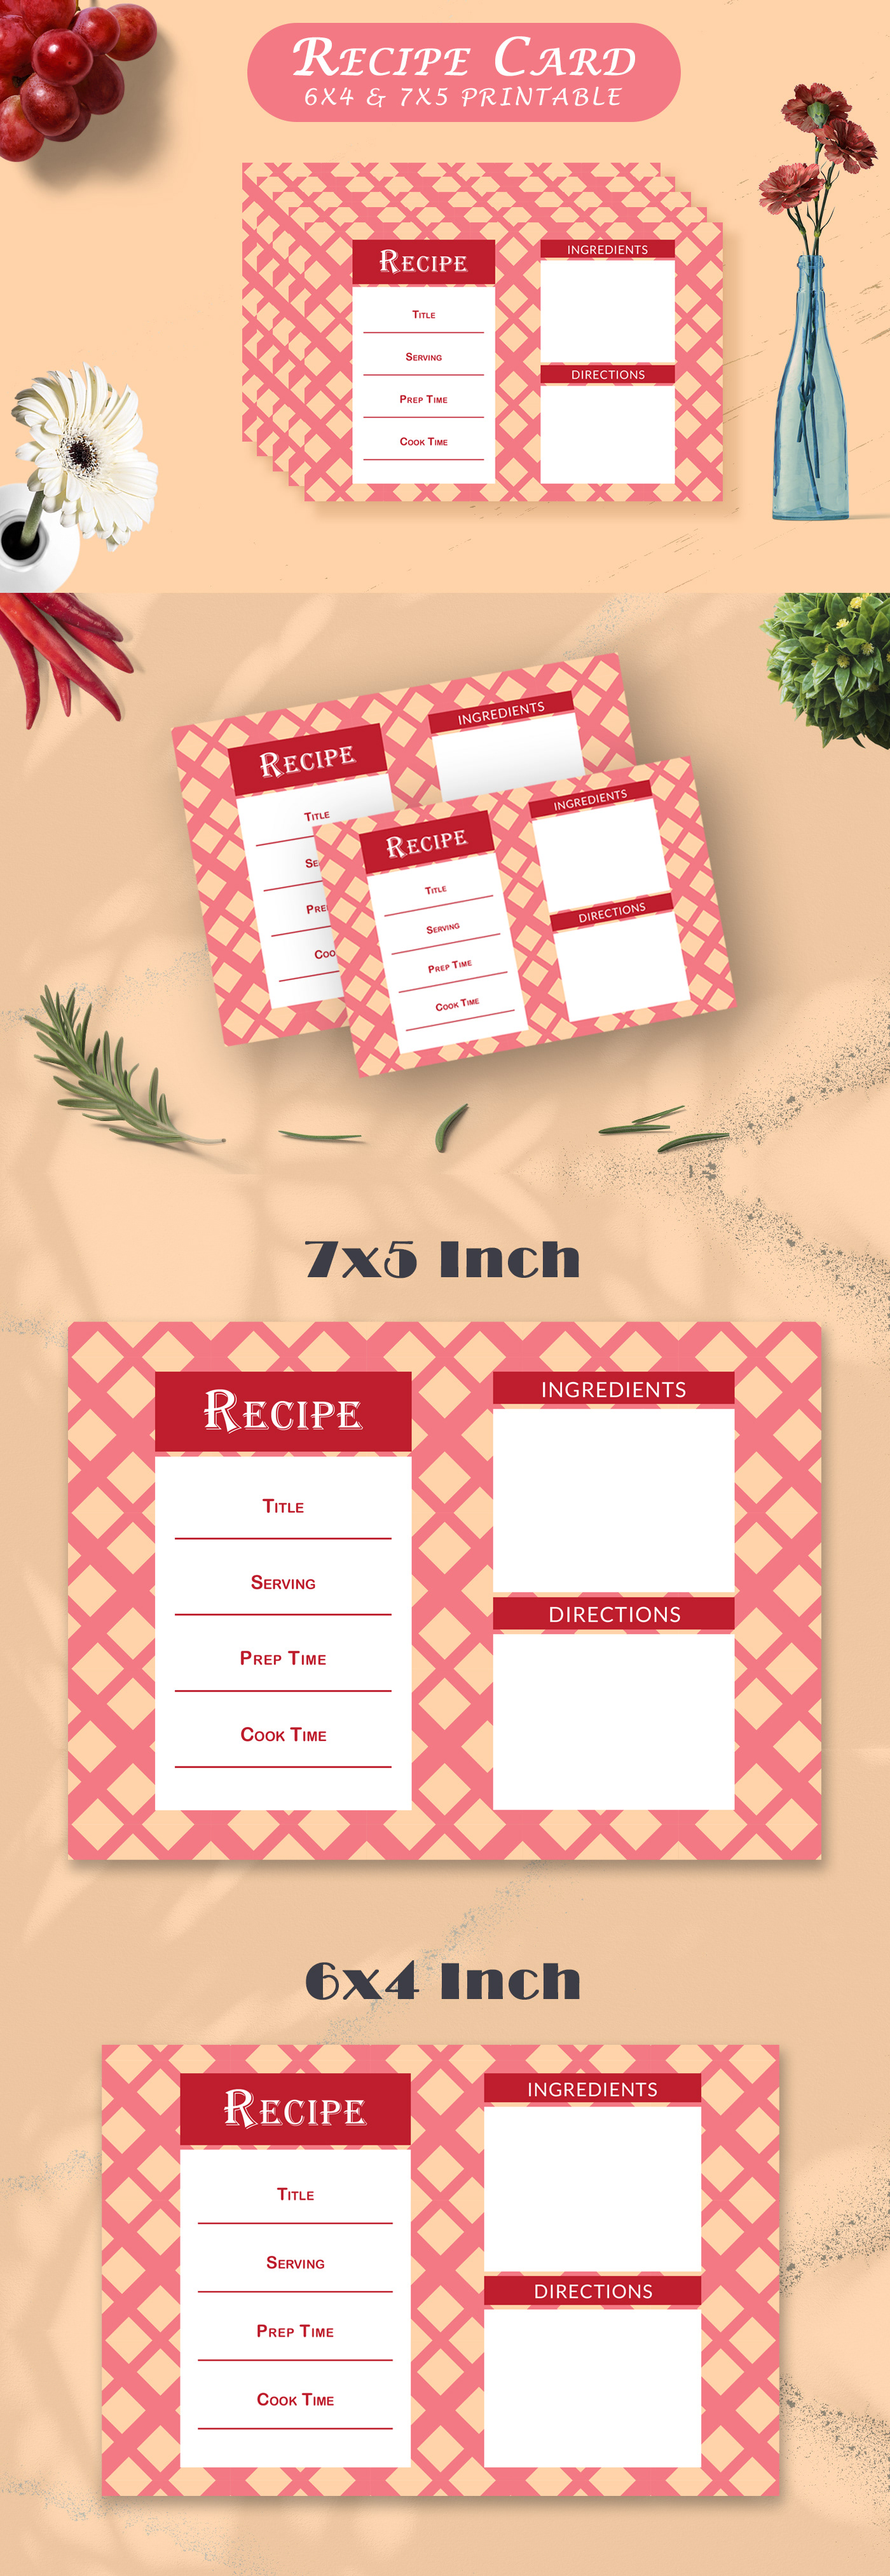 Free Recipe Card Printable Template V14 is a creative recipe template for your forthcoming projects.